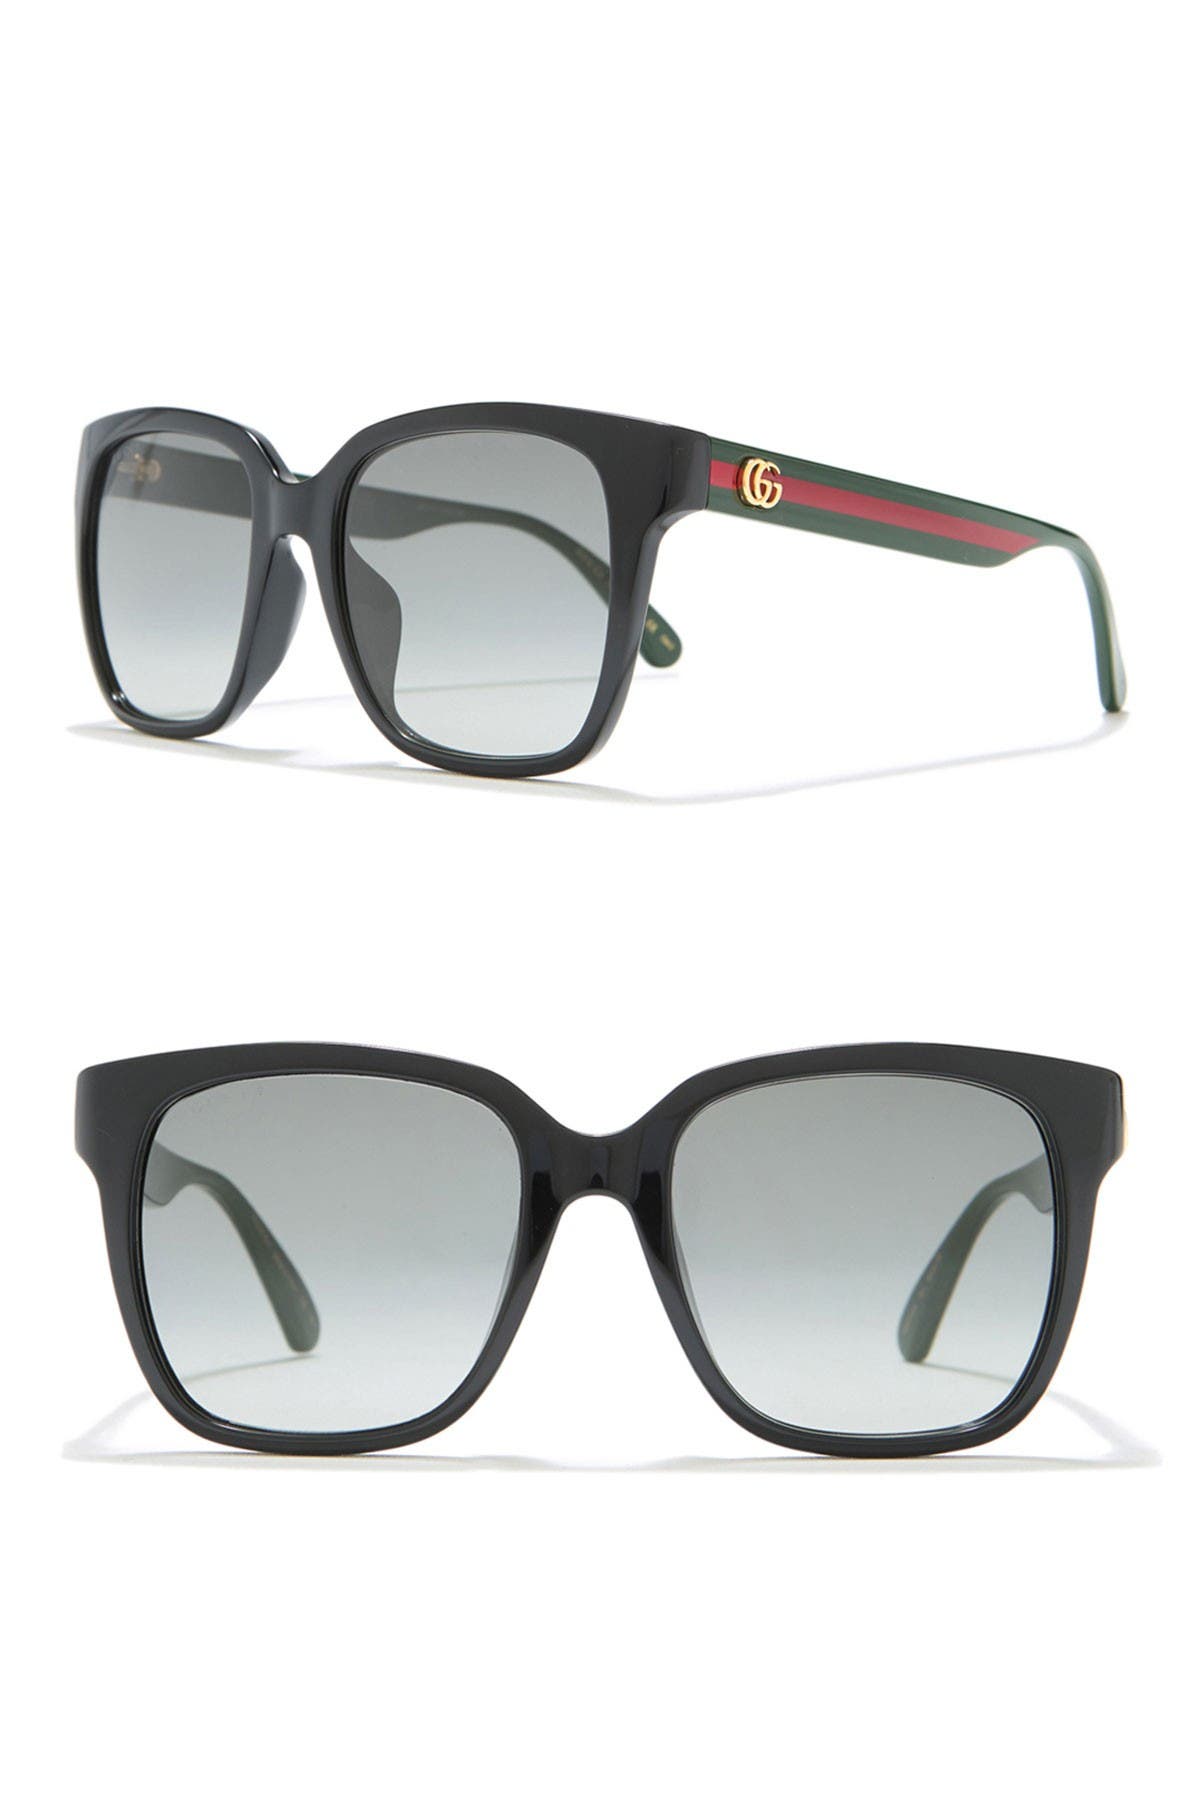 Gucci 53mm Oversized Square Sunglasses Nordstrom Rack 